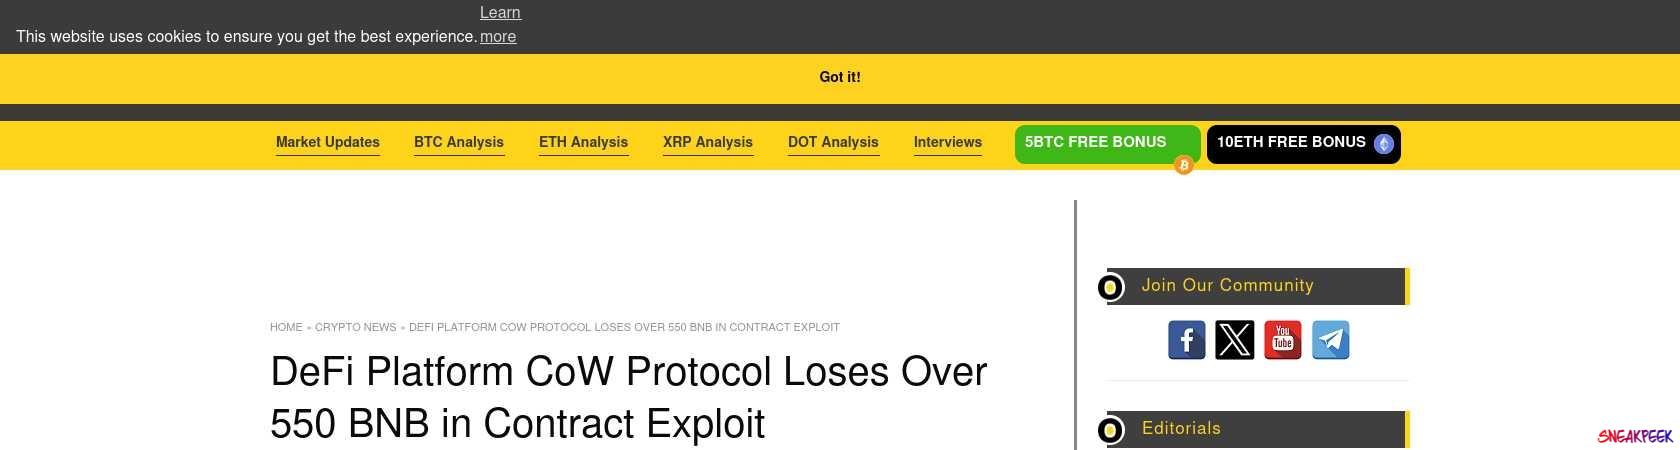 Read the full Article:  ⭲ DeFi Platform CoW Protocol Loses Over 550 BNB in Contract Exploit